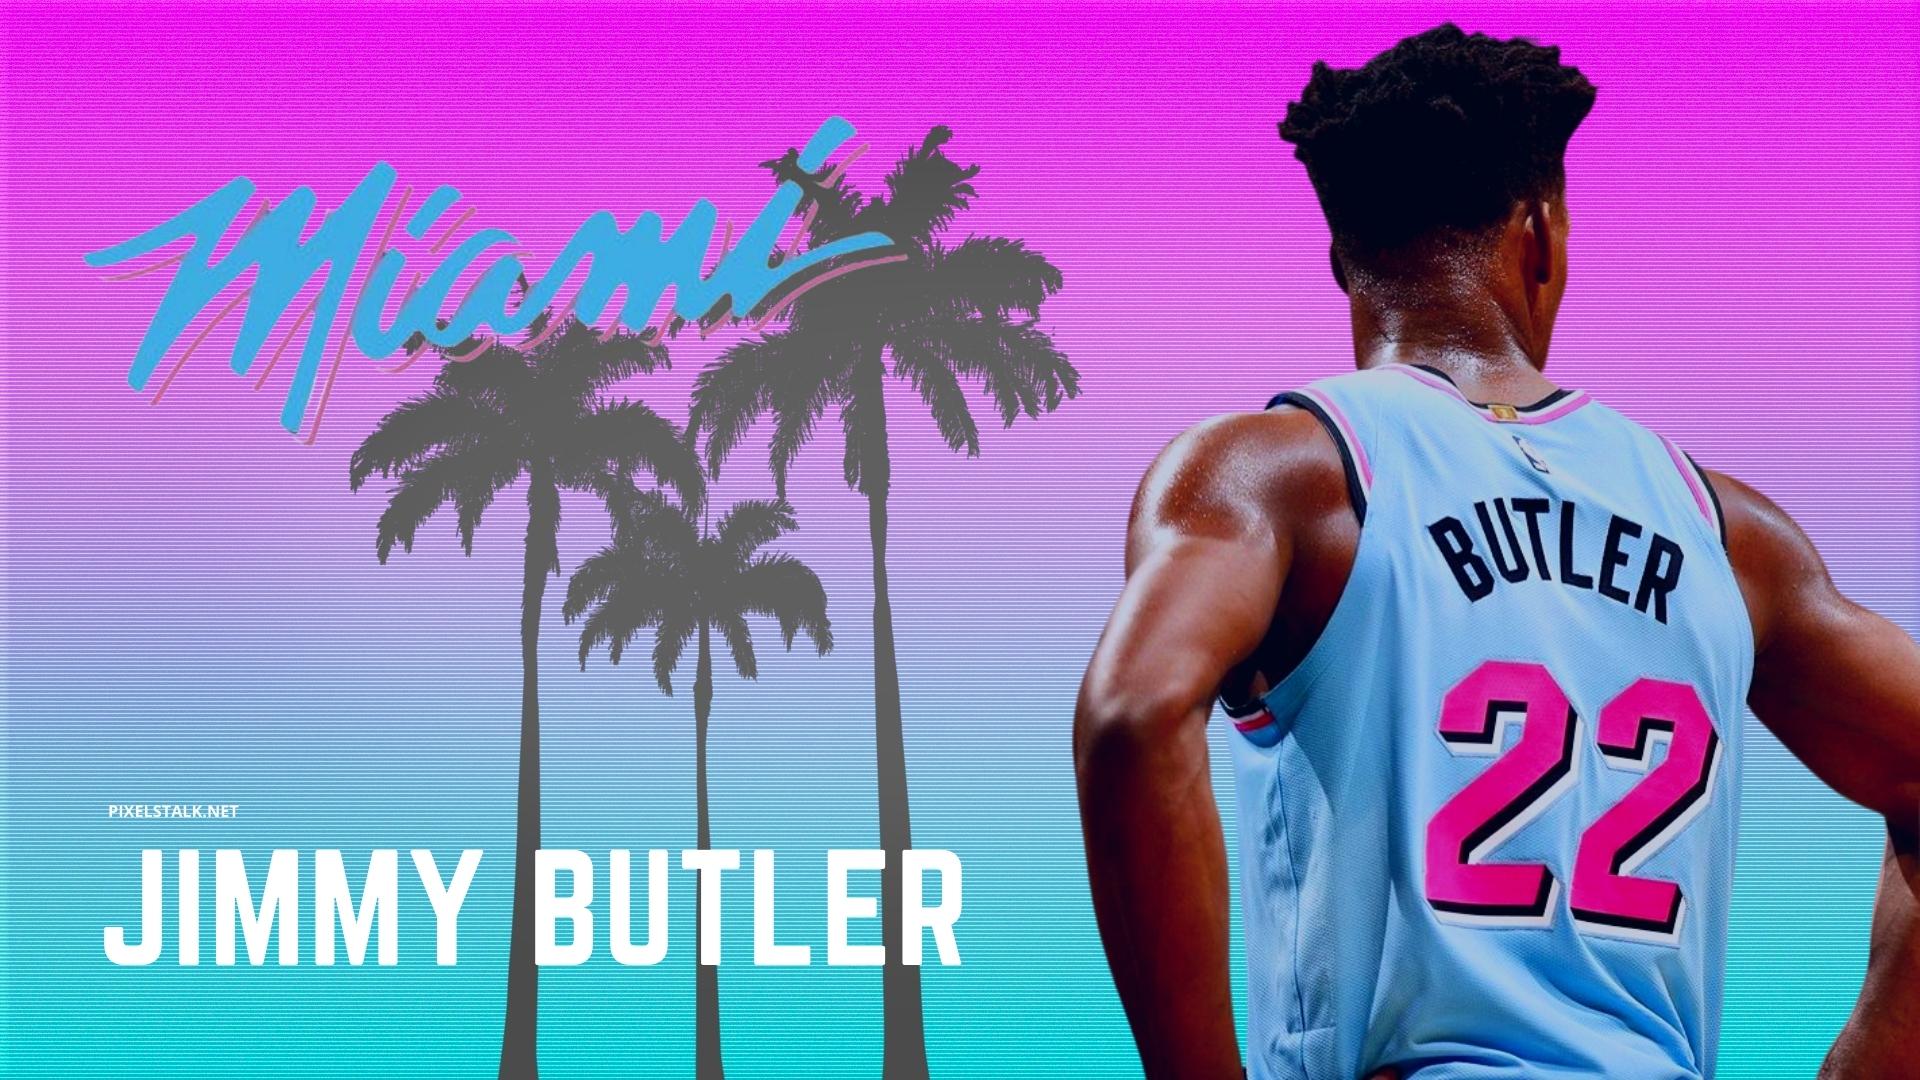 Download Jimmy Butler wallpapers for mobile phone, free Jimmy Butler HD  pictures